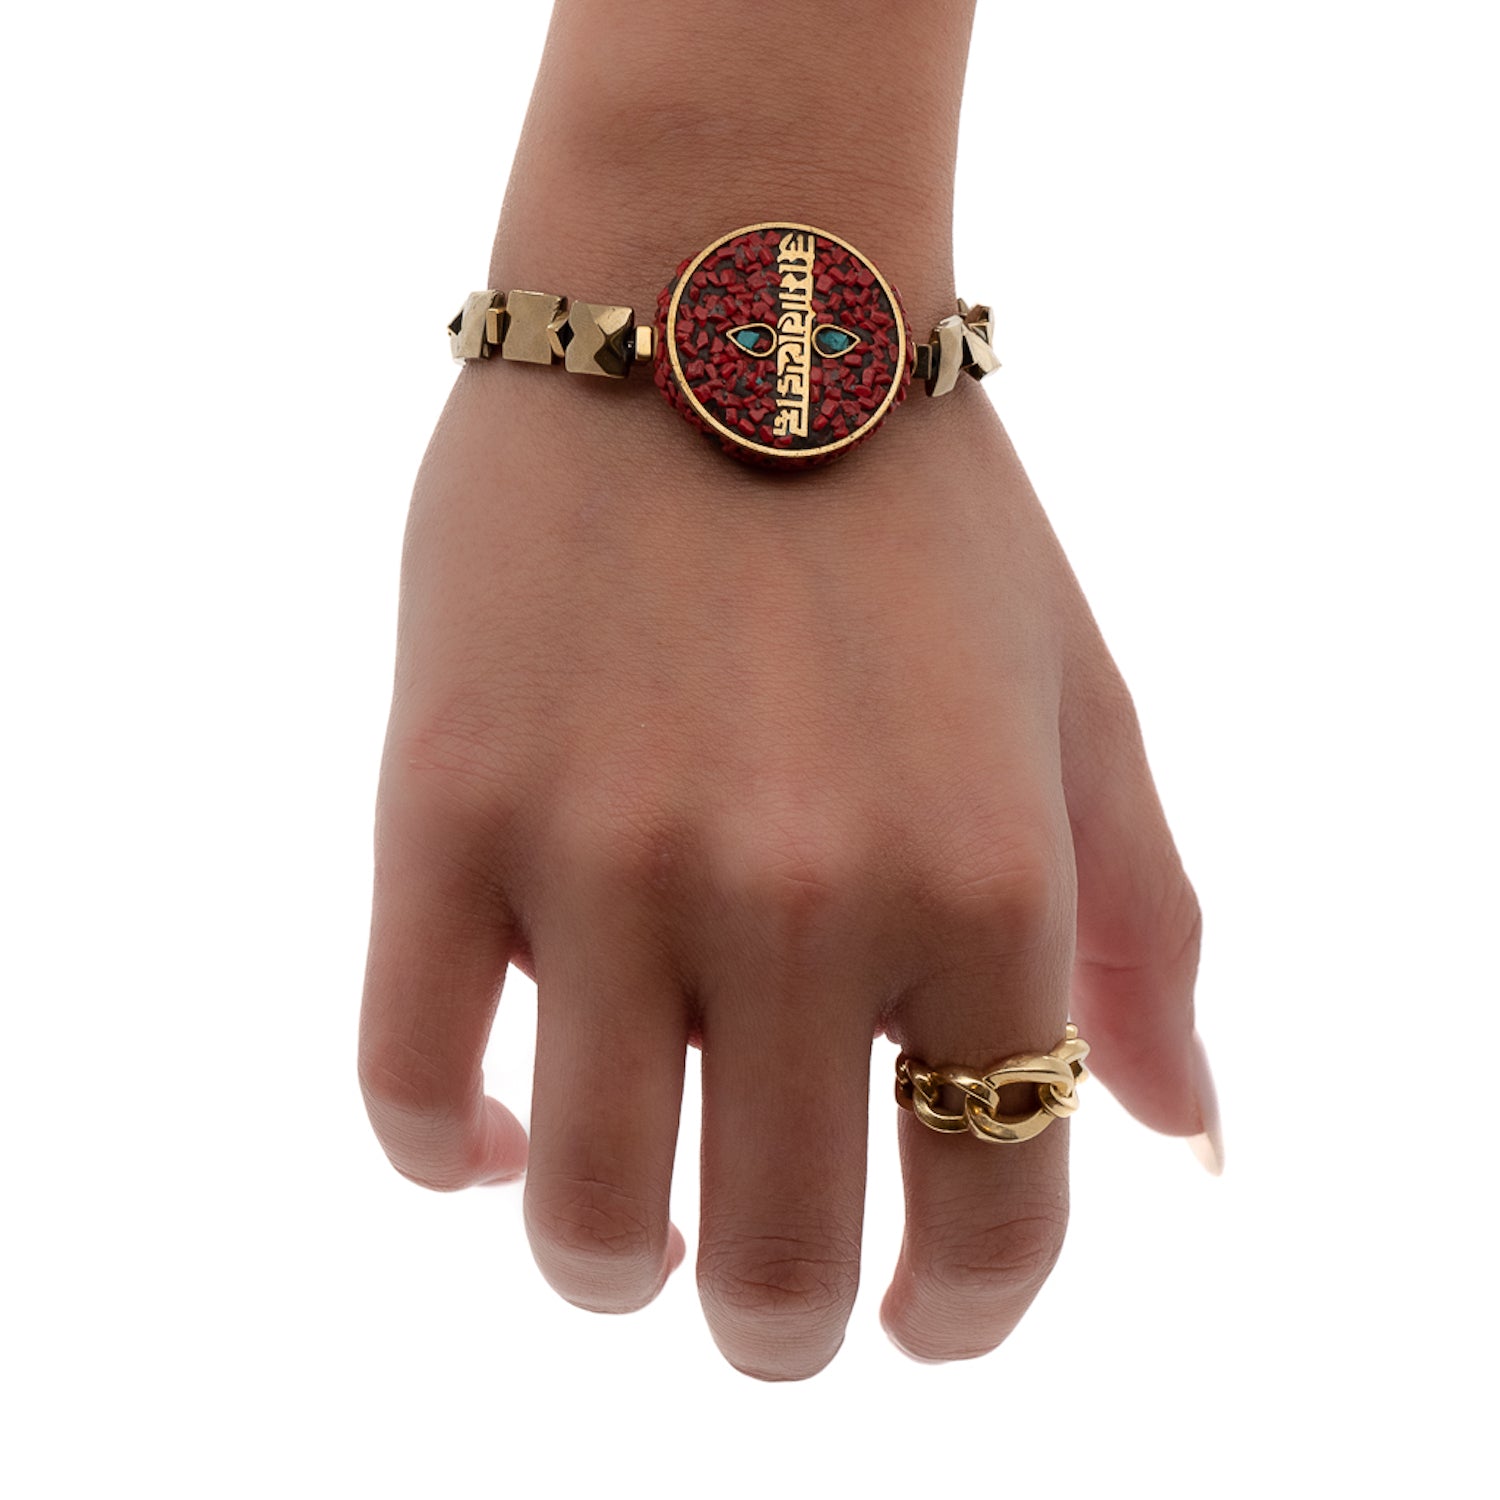 See the Om Mani Padme Hum Coral Mantra Bracelet on the hand model's wrist, radiating spiritual energy and protection.